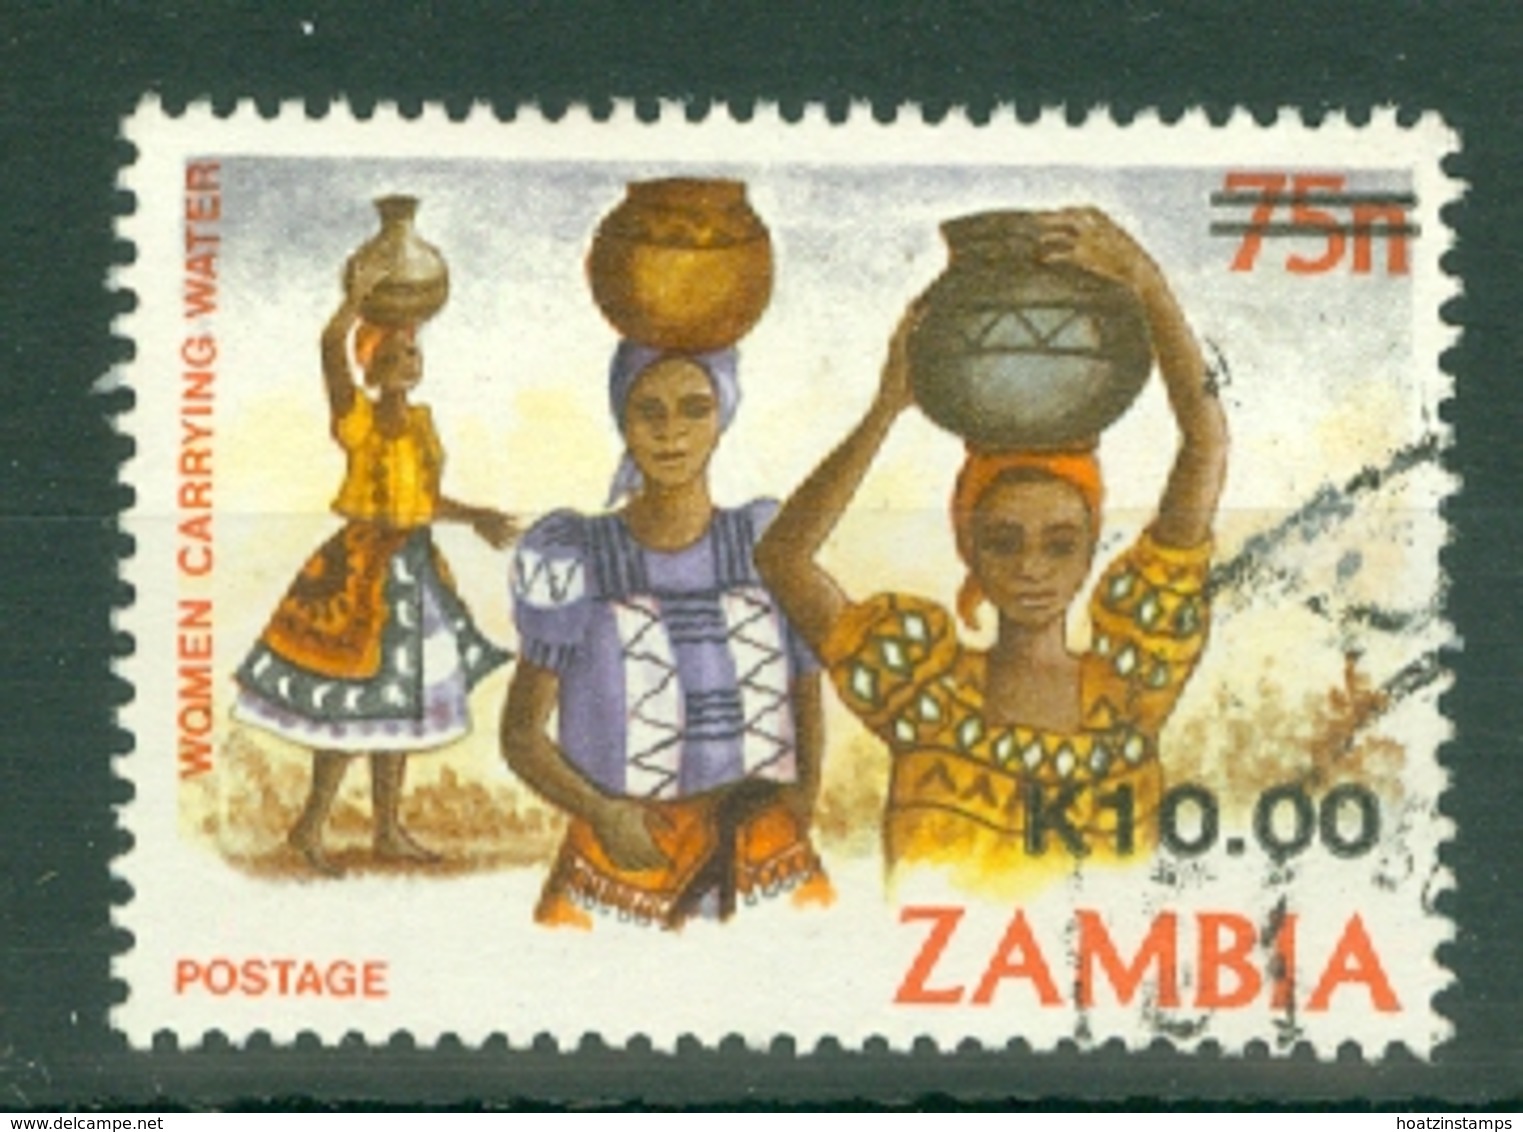 Zambia: 1989   Surcharge   SG583    K10 On 75n     Used - Zambia (1965-...)